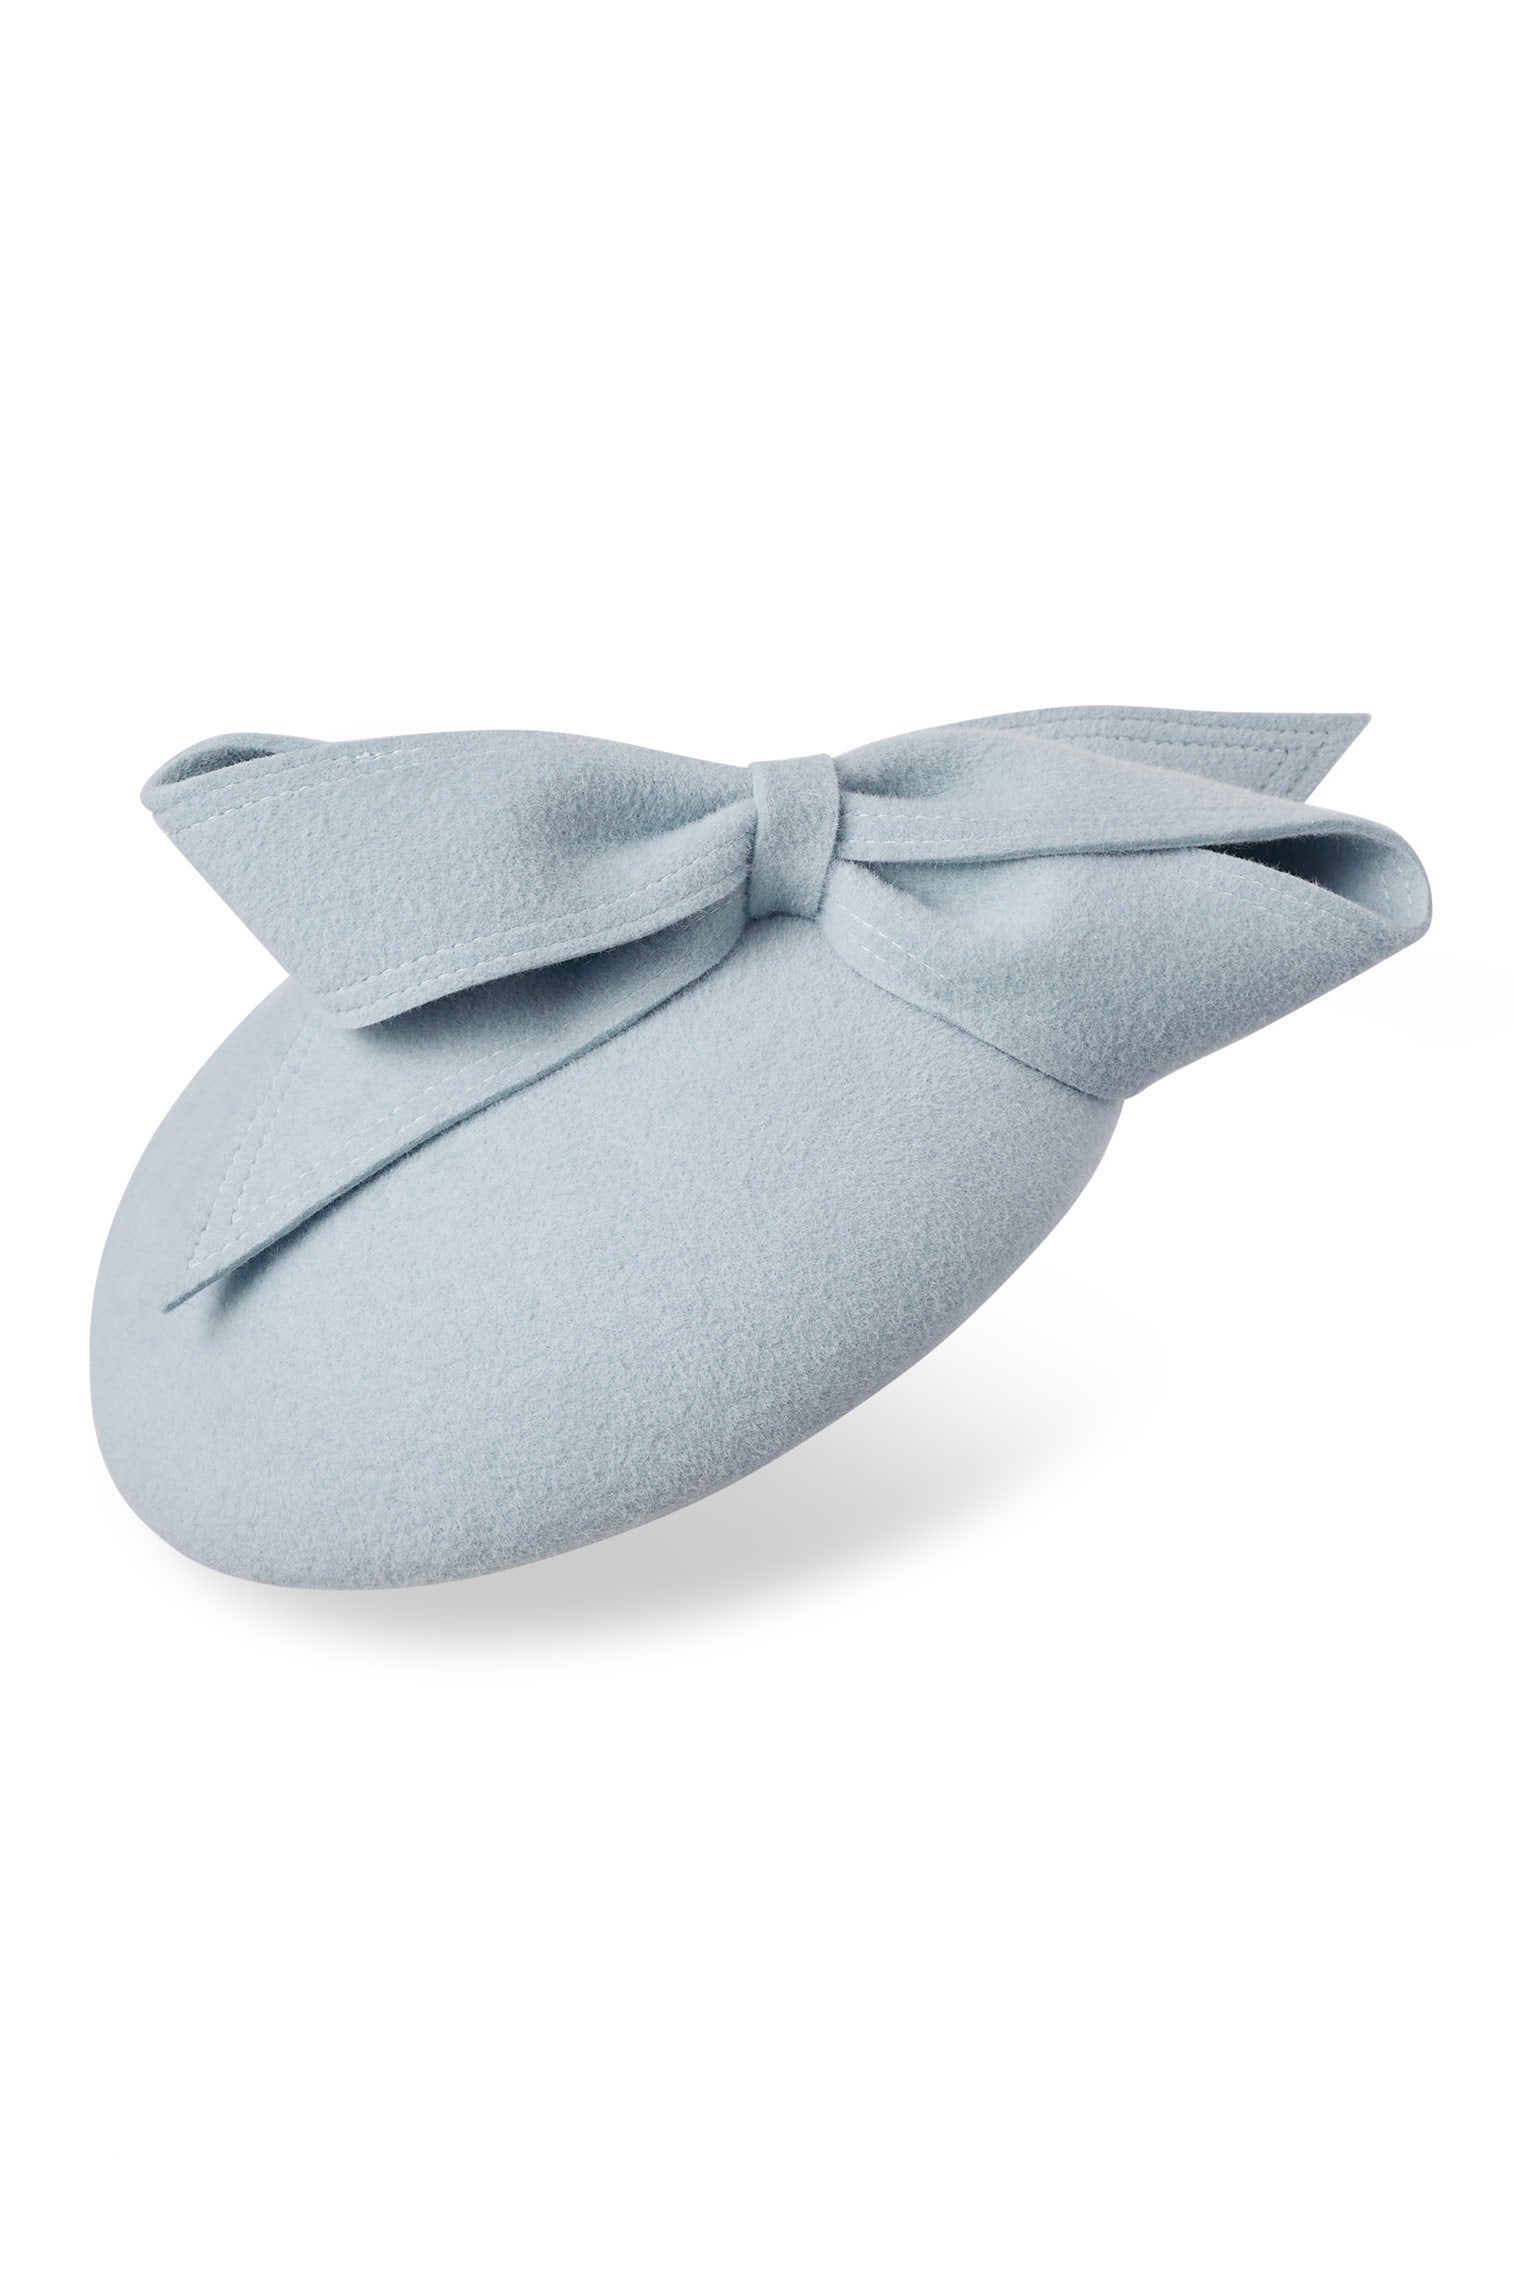 Lana Light Blue Button Hat - Products - Lock & Co. Hatters London UK